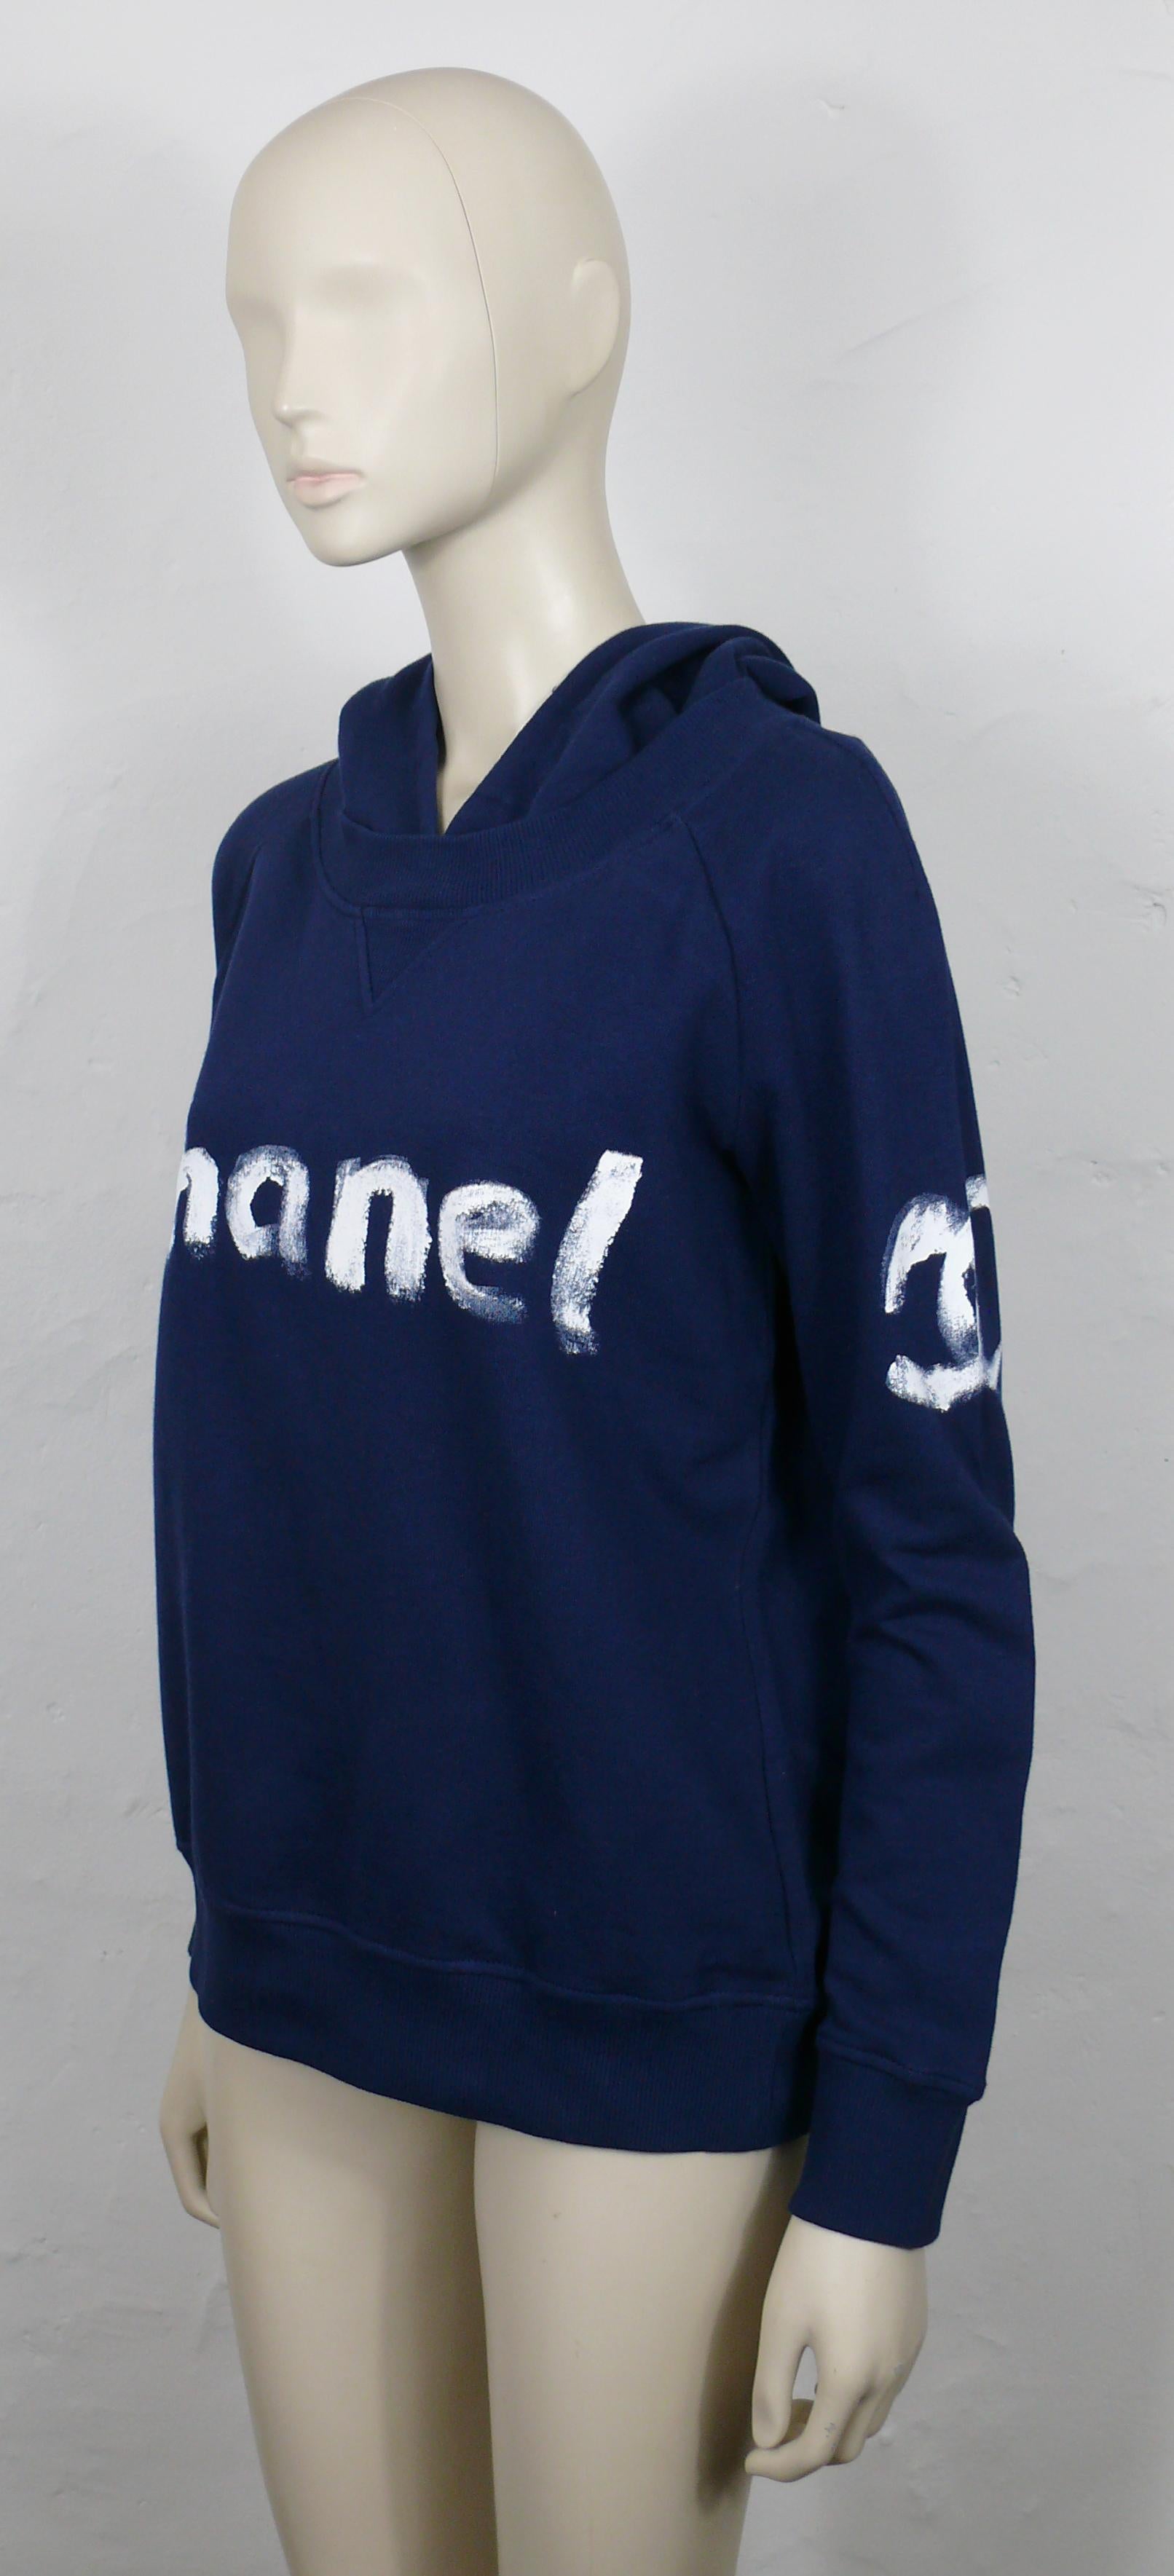 CHANEL Christmas 2013 VIPs Limited Edition Hooded Cotton Sweatshirt Size M For Sale 4